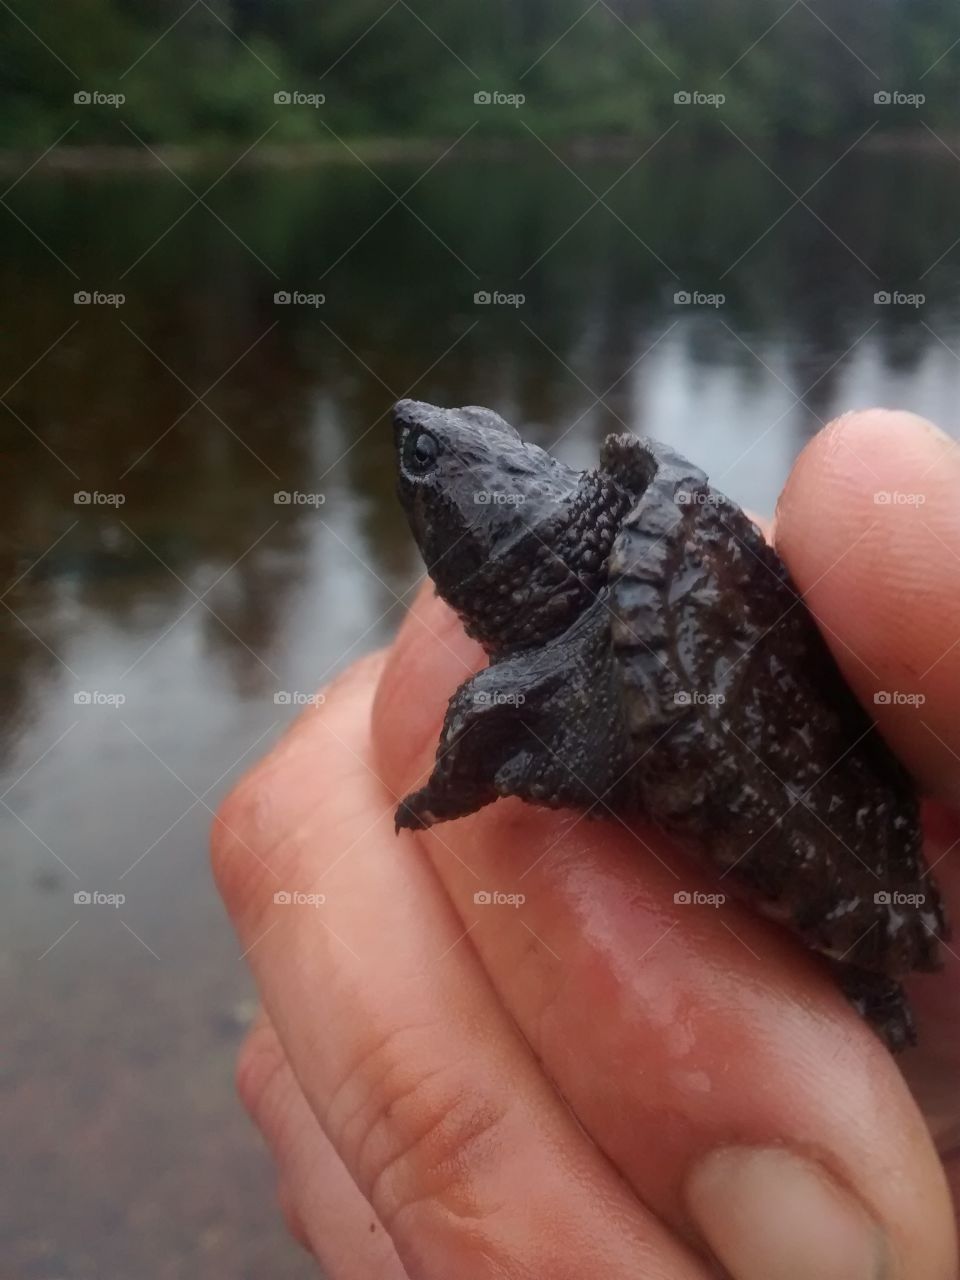 baby snapping turtle hatchling